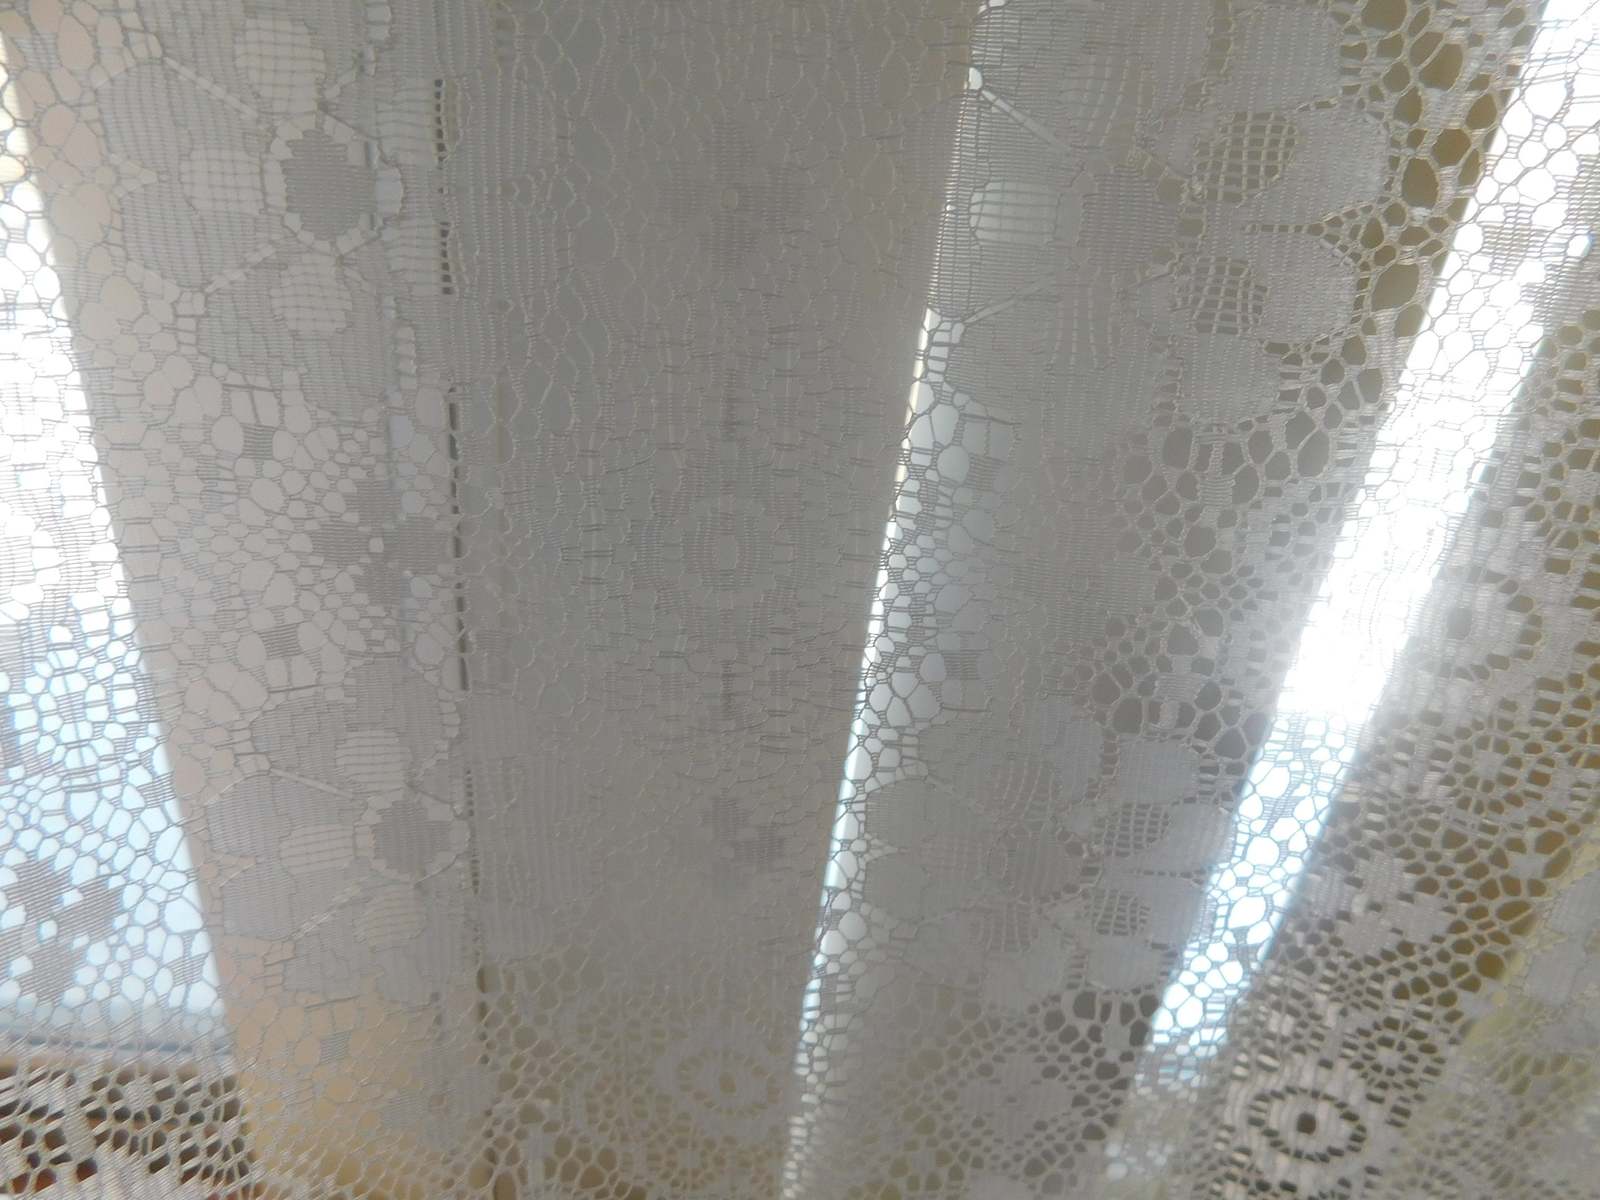 Needle Point Crochet Window Lace Curtains 58 x 63 L White Floral Hand Made Ins